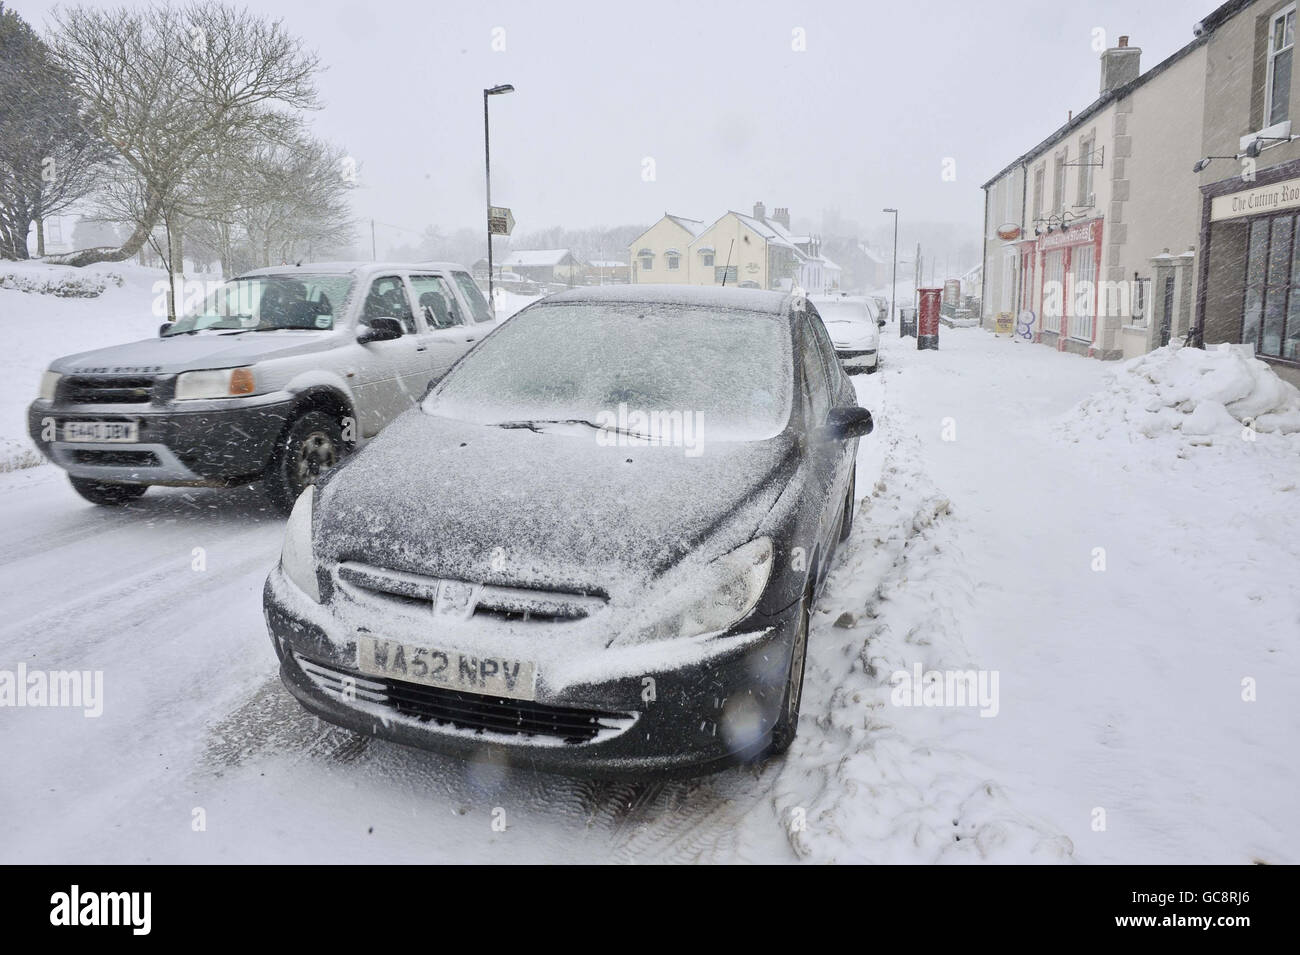 Winter weather Jan12th. Snow on cars as a fresh batch of snow falls in the South West of the UK near Two Bridges, Dartmoor, Devon. Stock Photo